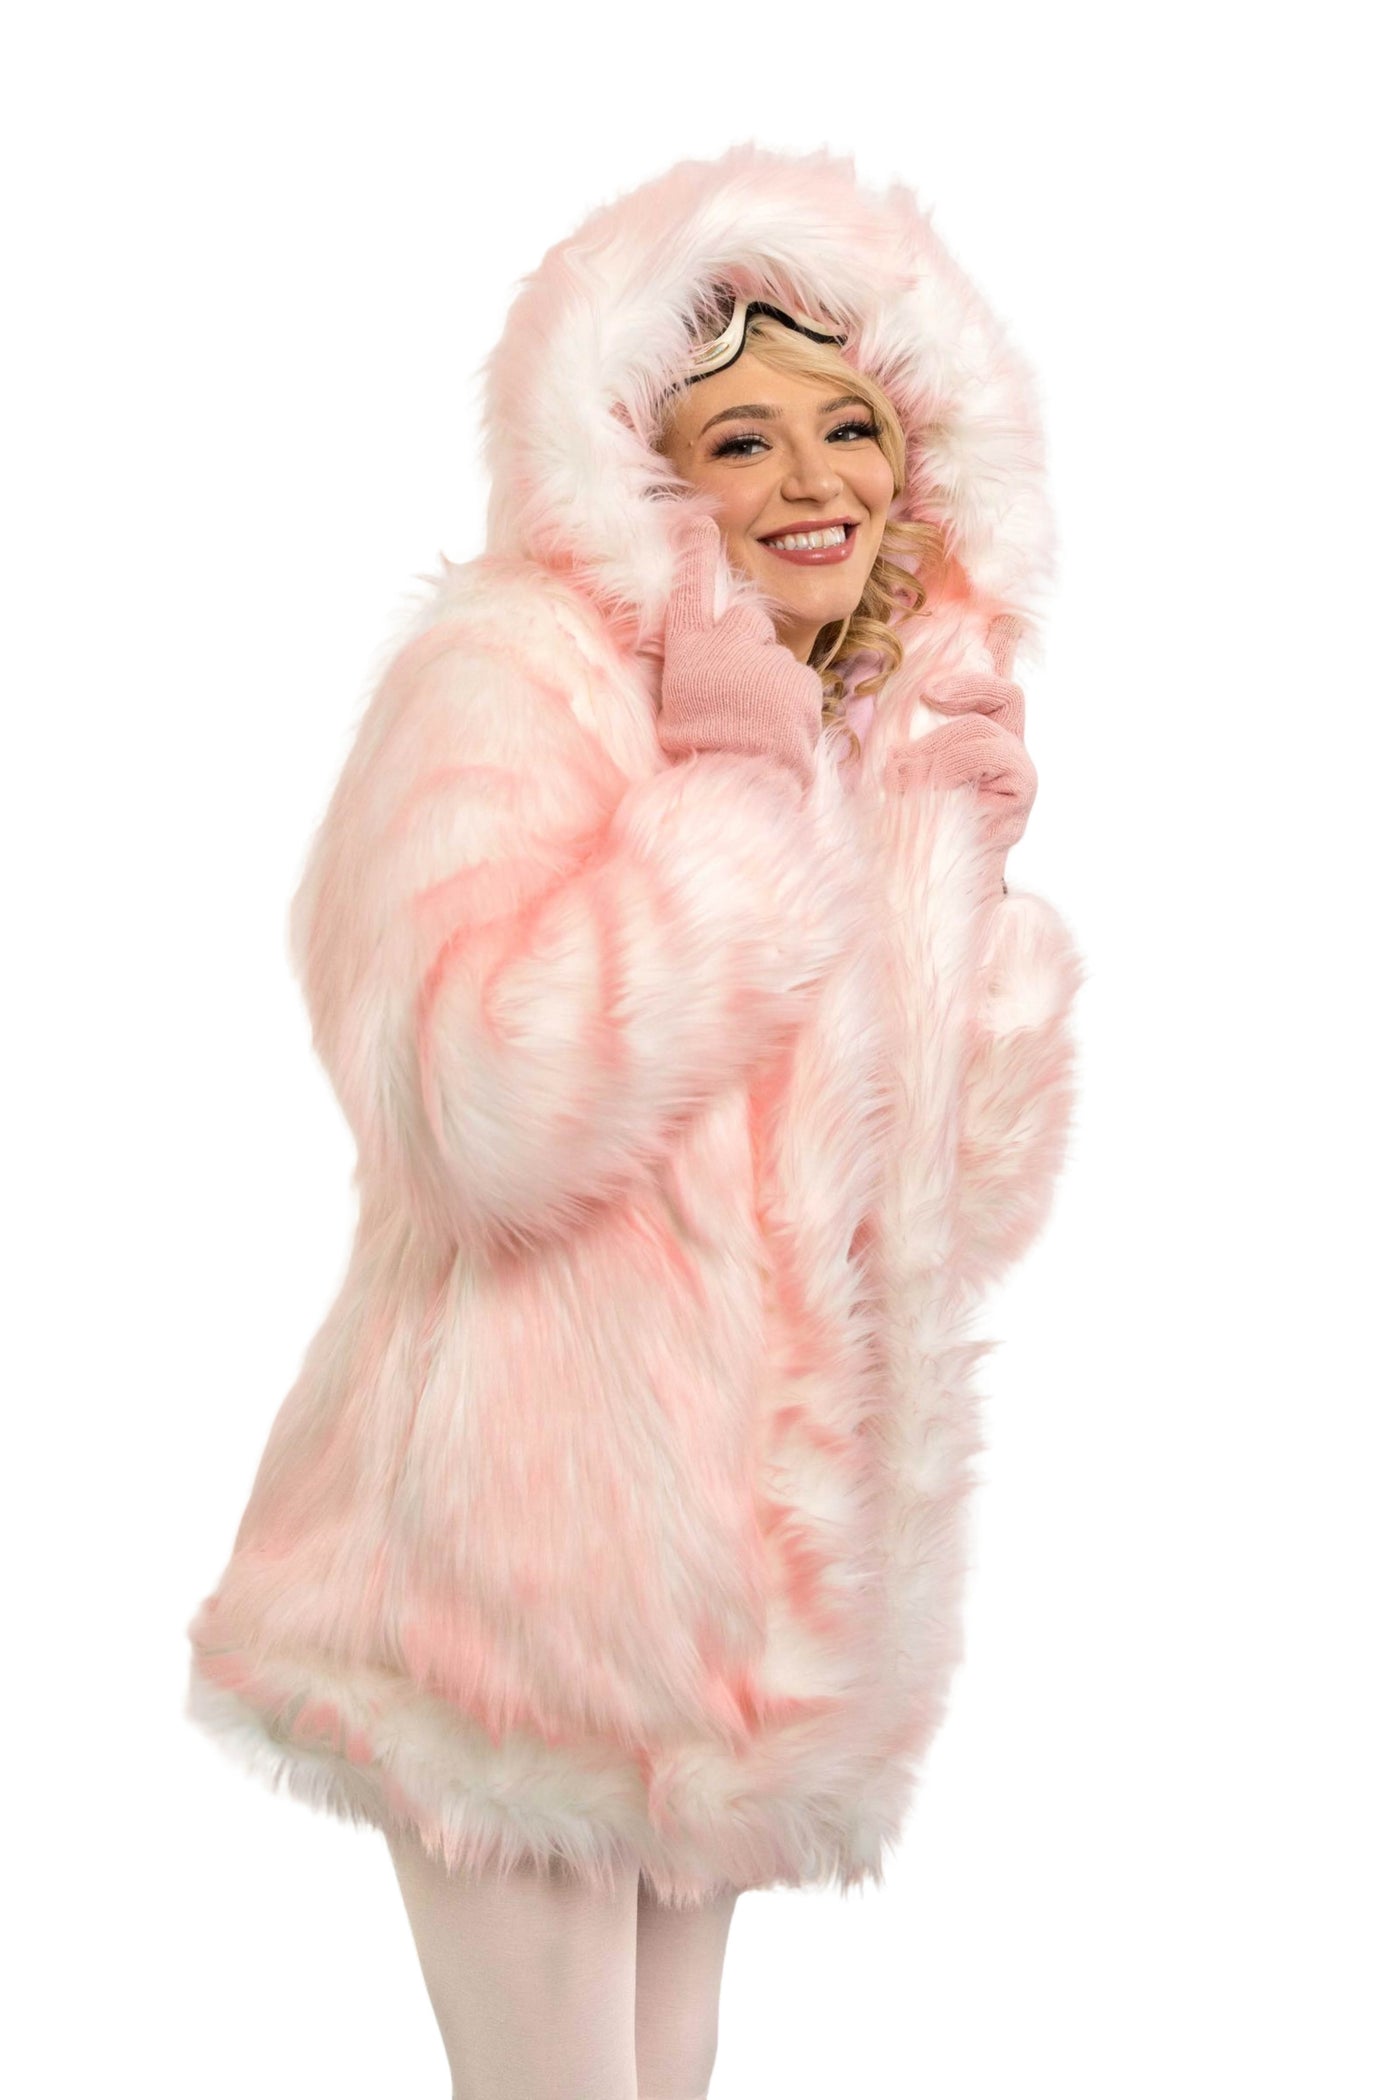 Women's C3 (Cool, Classic, Comfy) Coat in "Just the Tip Pink"